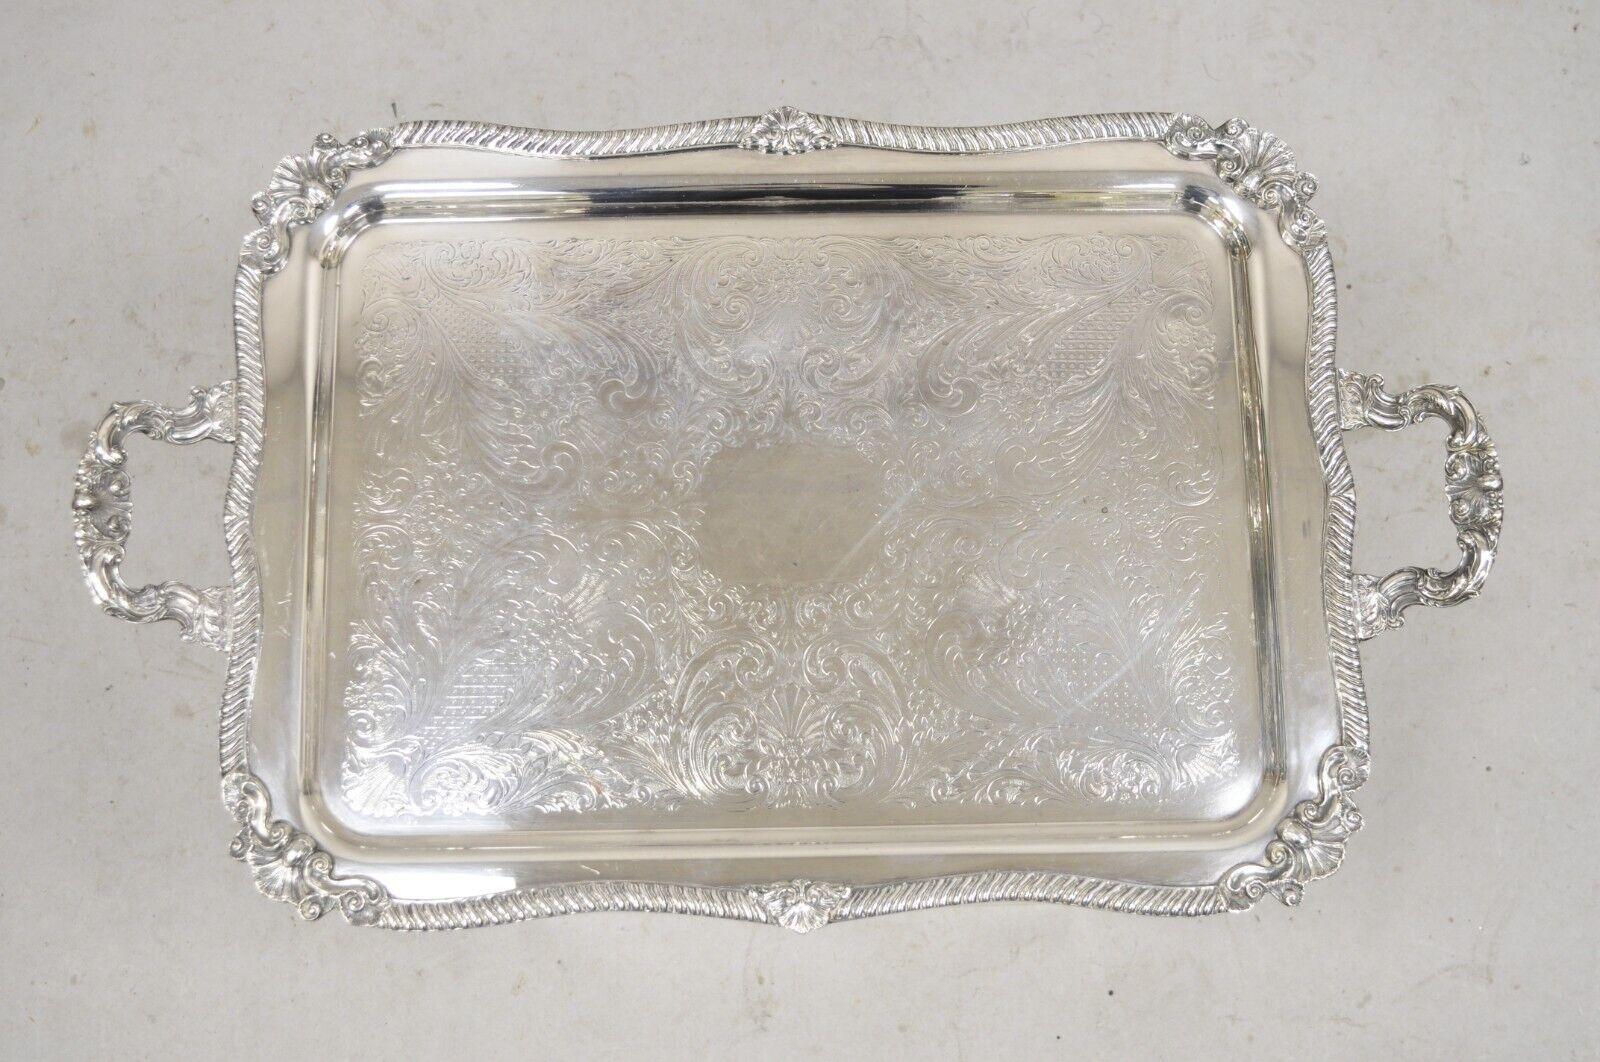 Vintage Sheridan Large Ornate Silver Plated English Victorian Style Serving Platter Tray. Circa Mid 20th Century. Measurements:  3